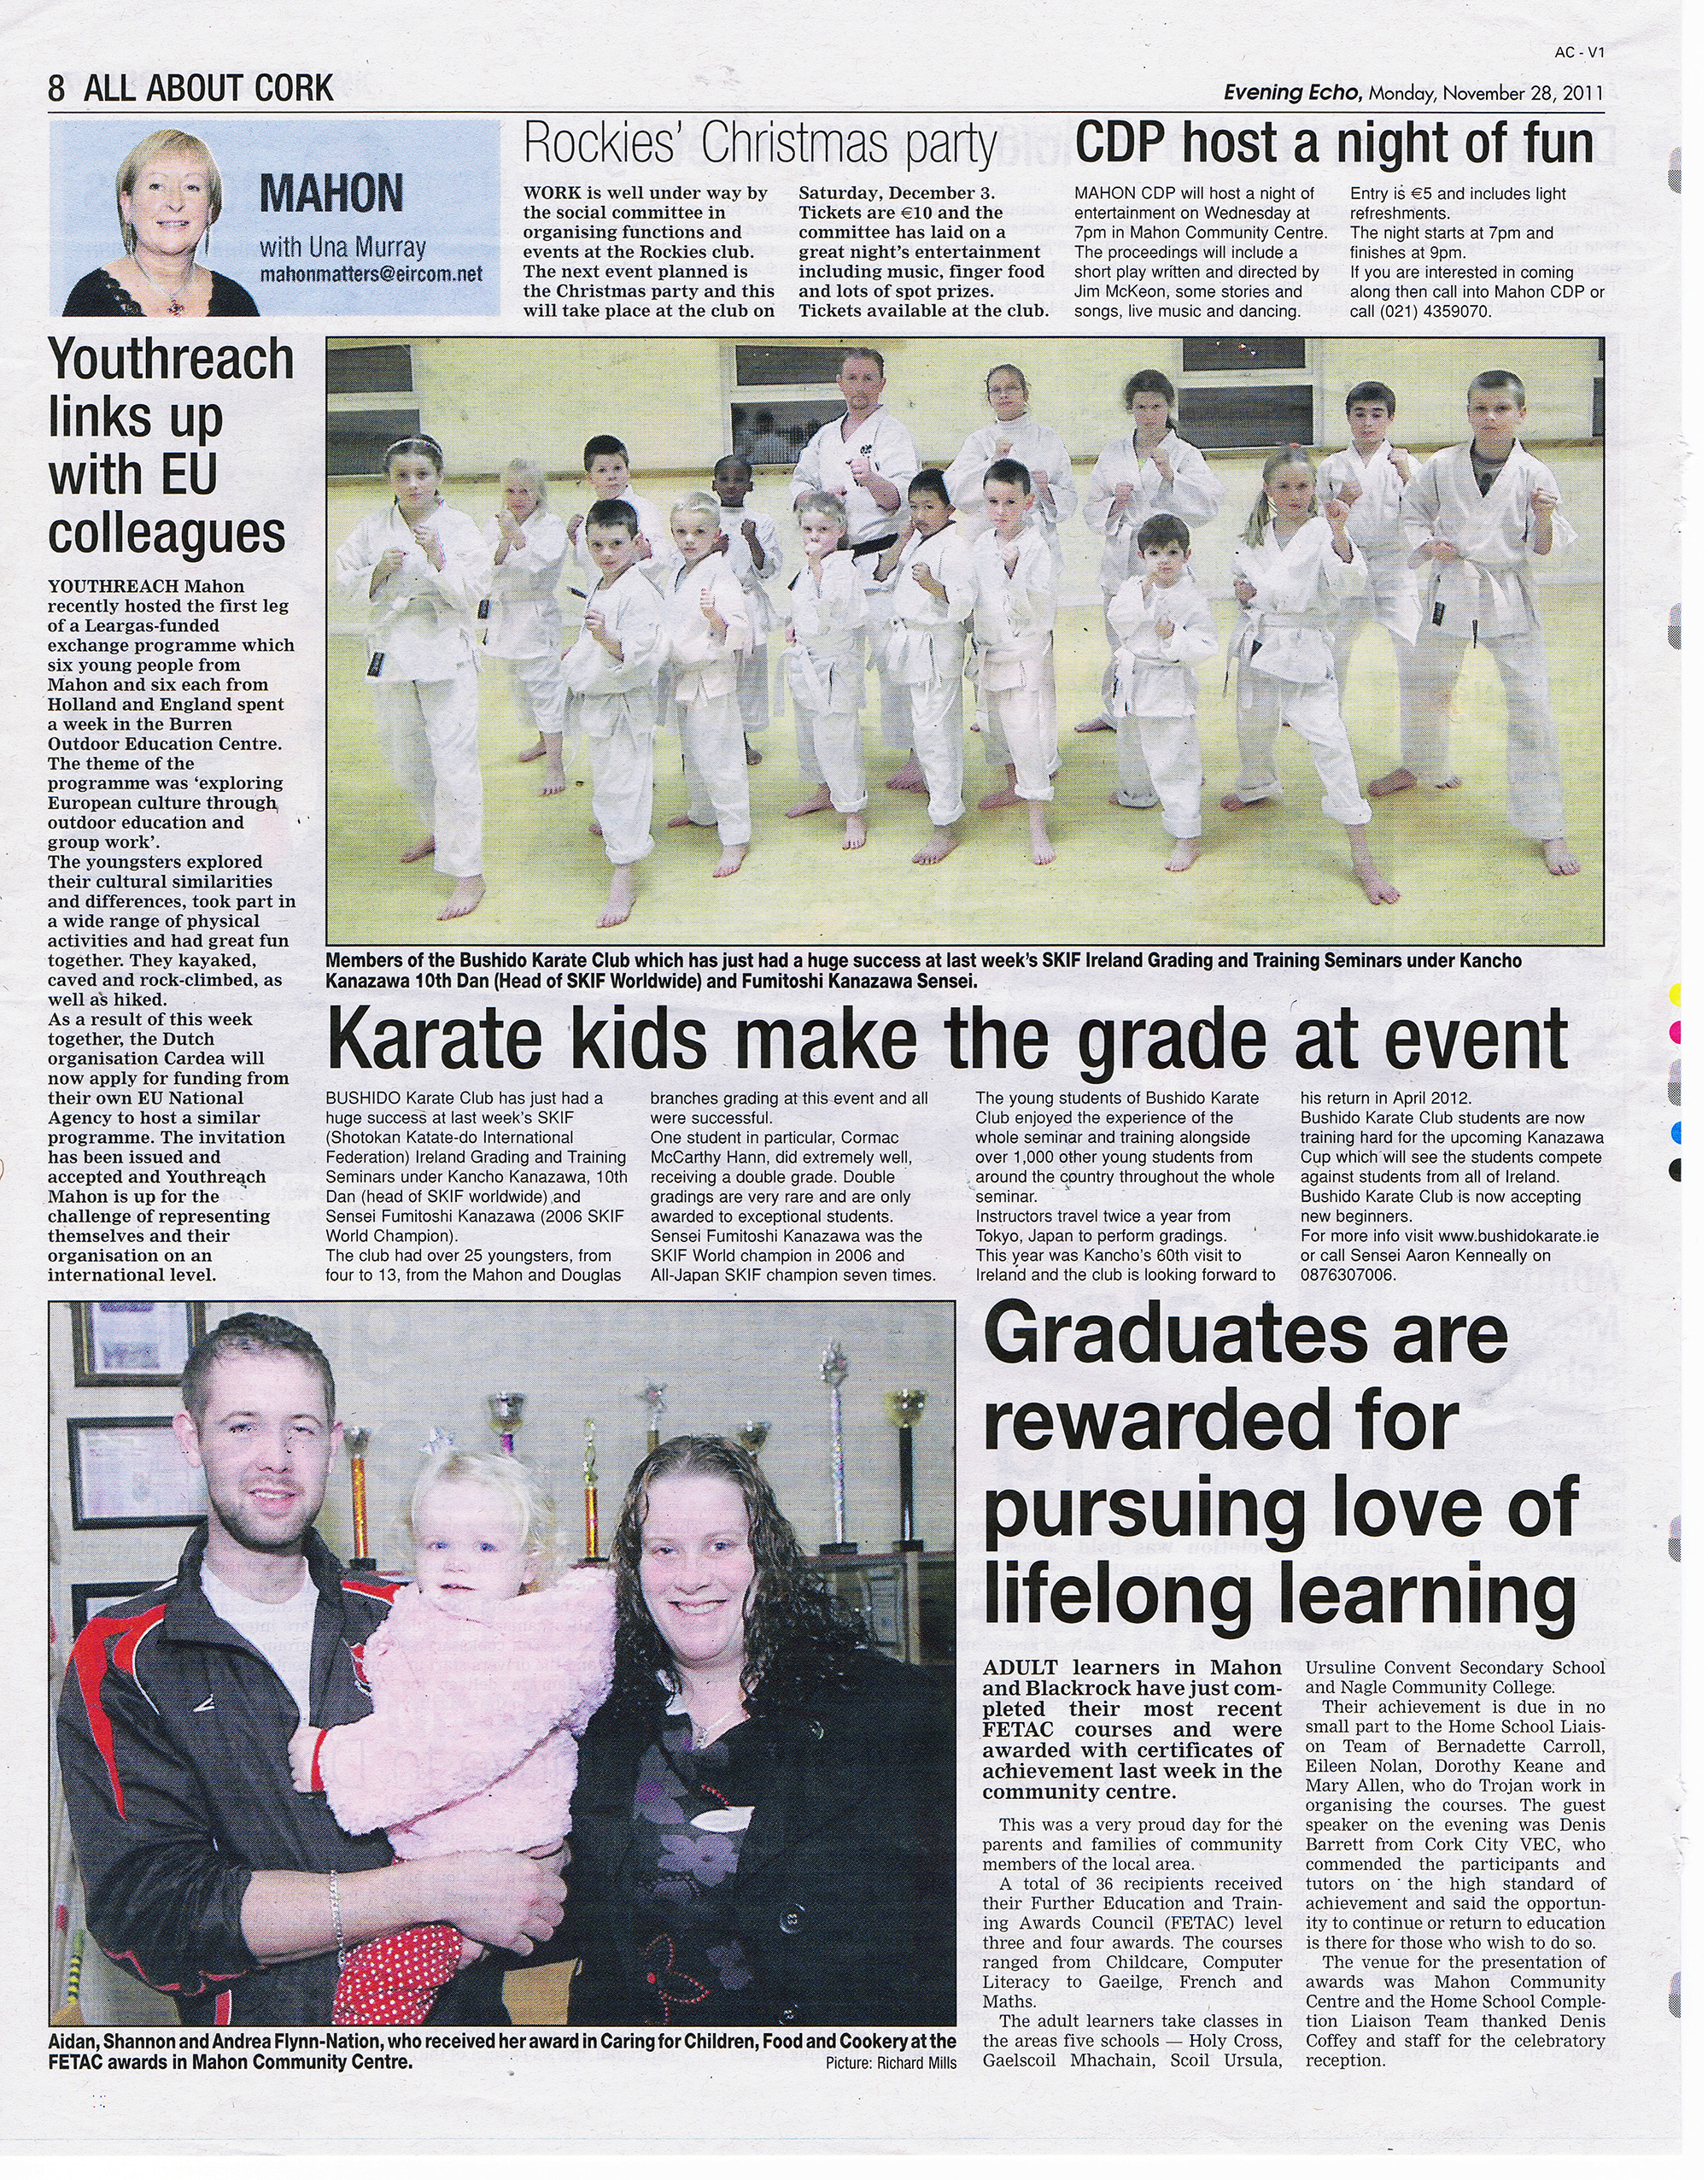 Evening Echo Feature: Karate kids make the grade at event